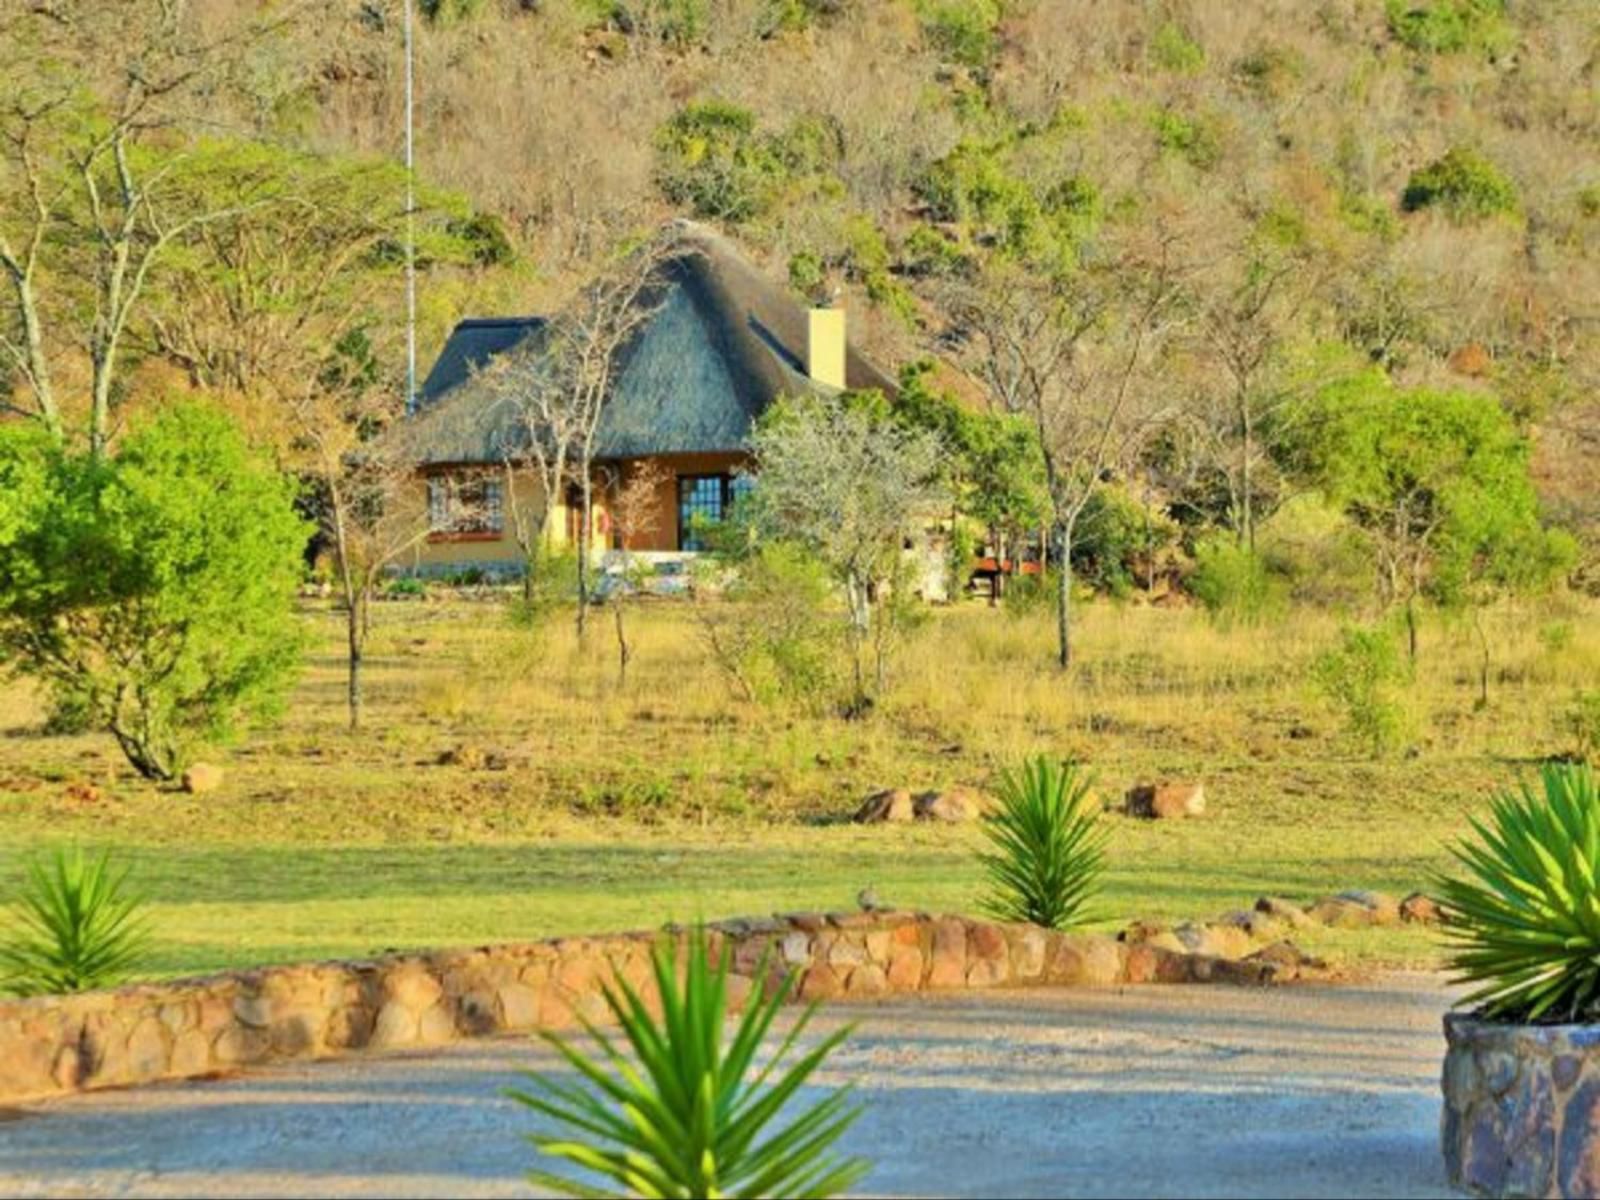 Kololo Game Reserve Vaalwater Limpopo Province South Africa Building, Architecture